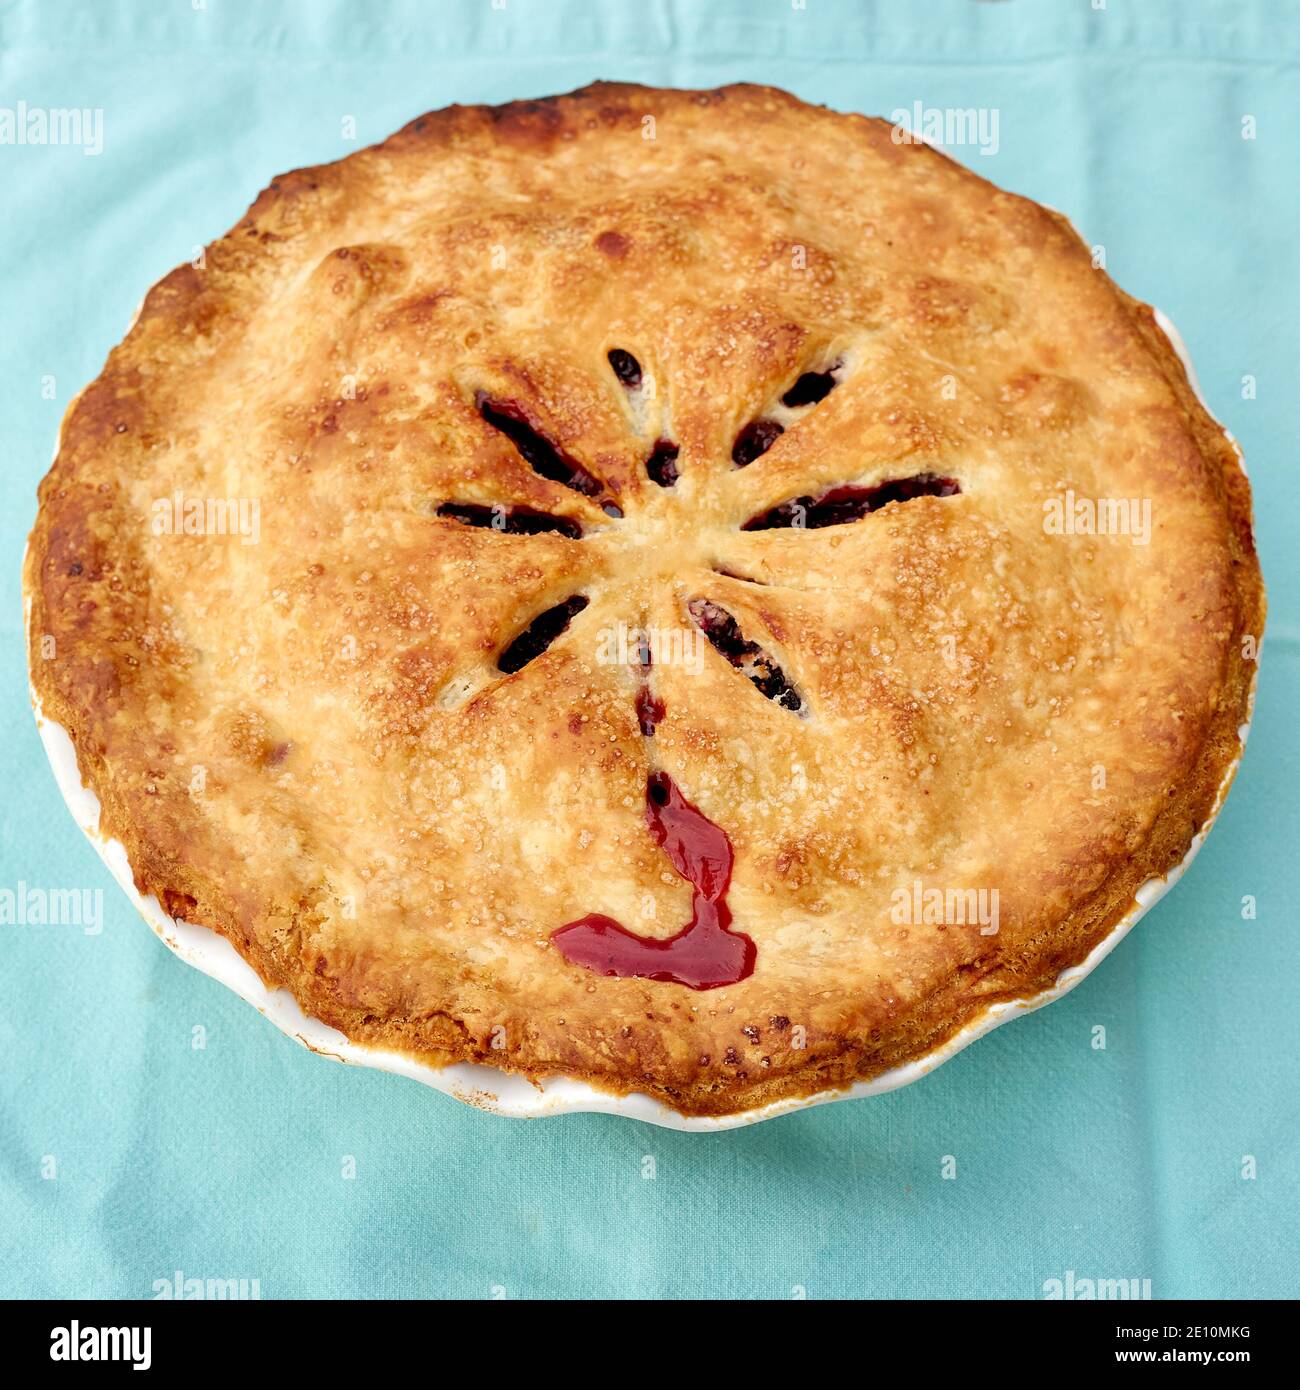 Freshly Baked Berry Pie with Top Crust, Top View Stock Photo